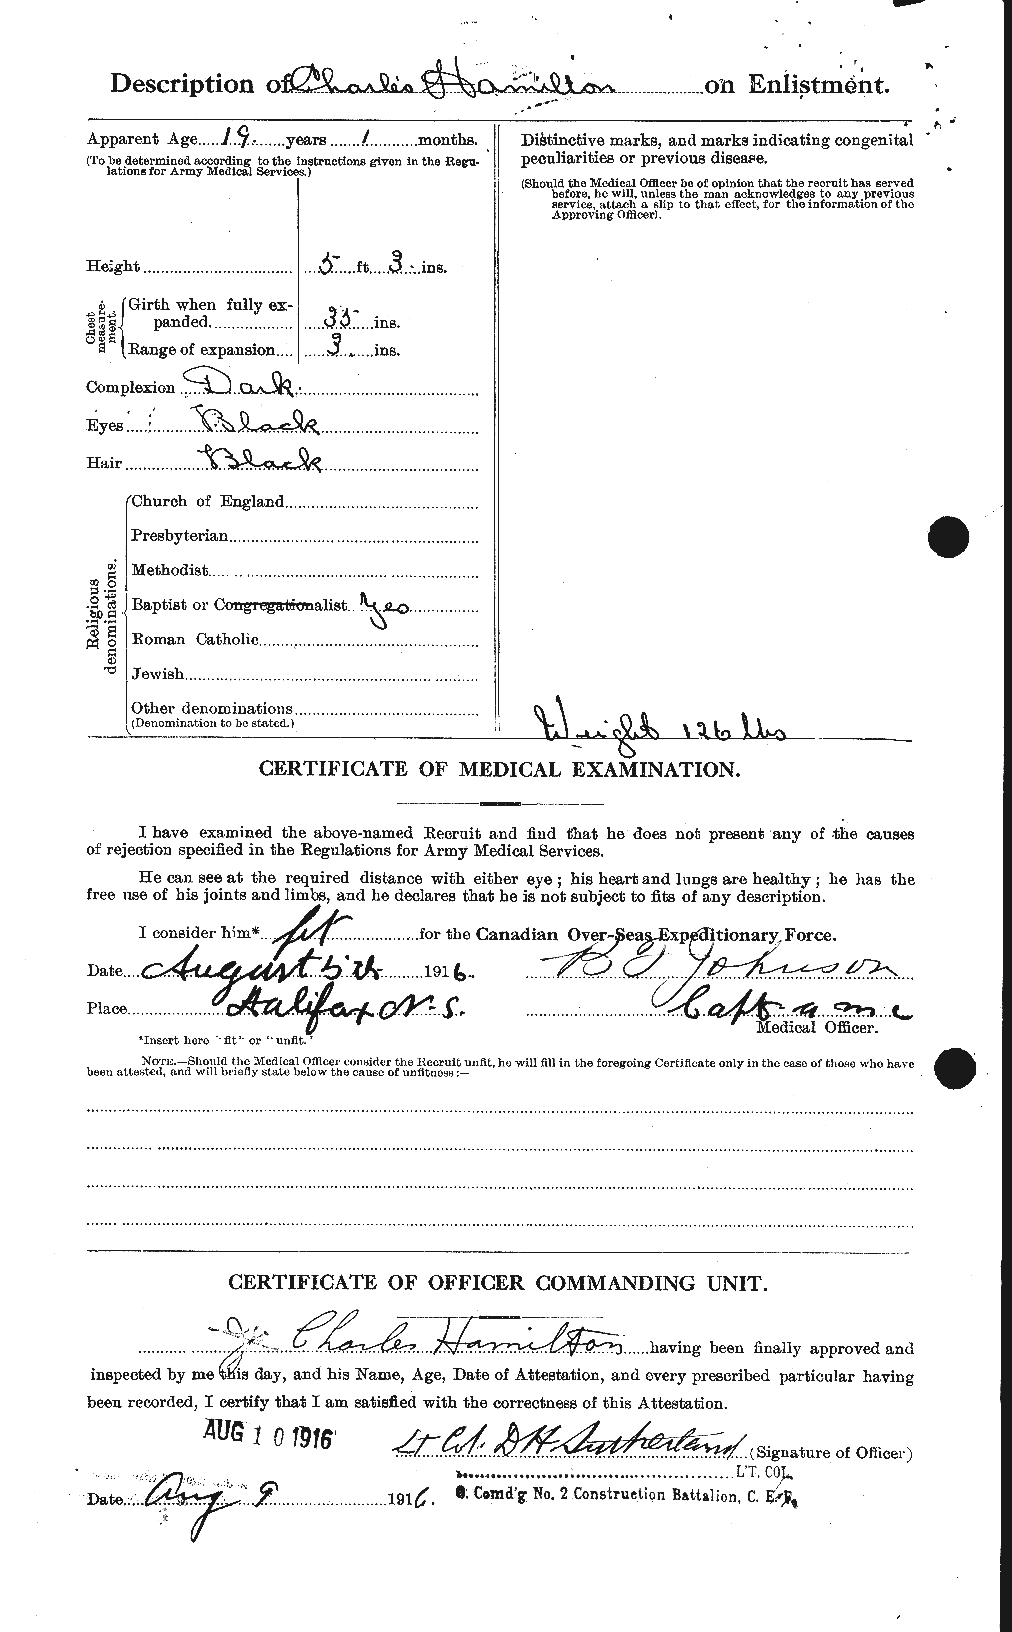 Personnel Records of the First World War - CEF 375298b